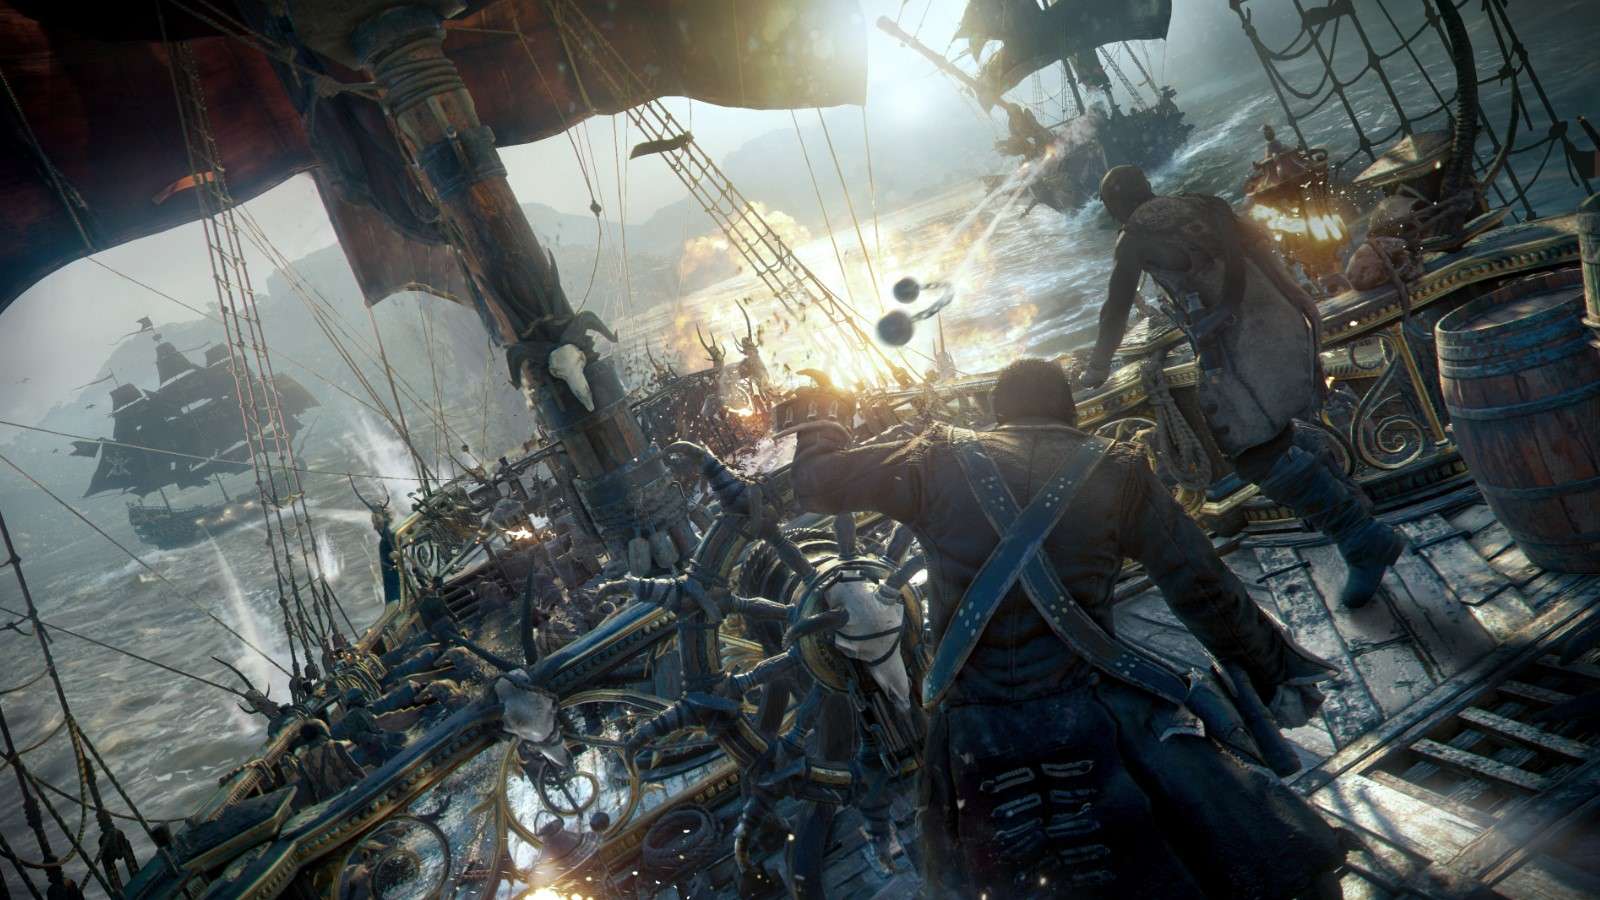 A vicious naval battle in Skull and Bones